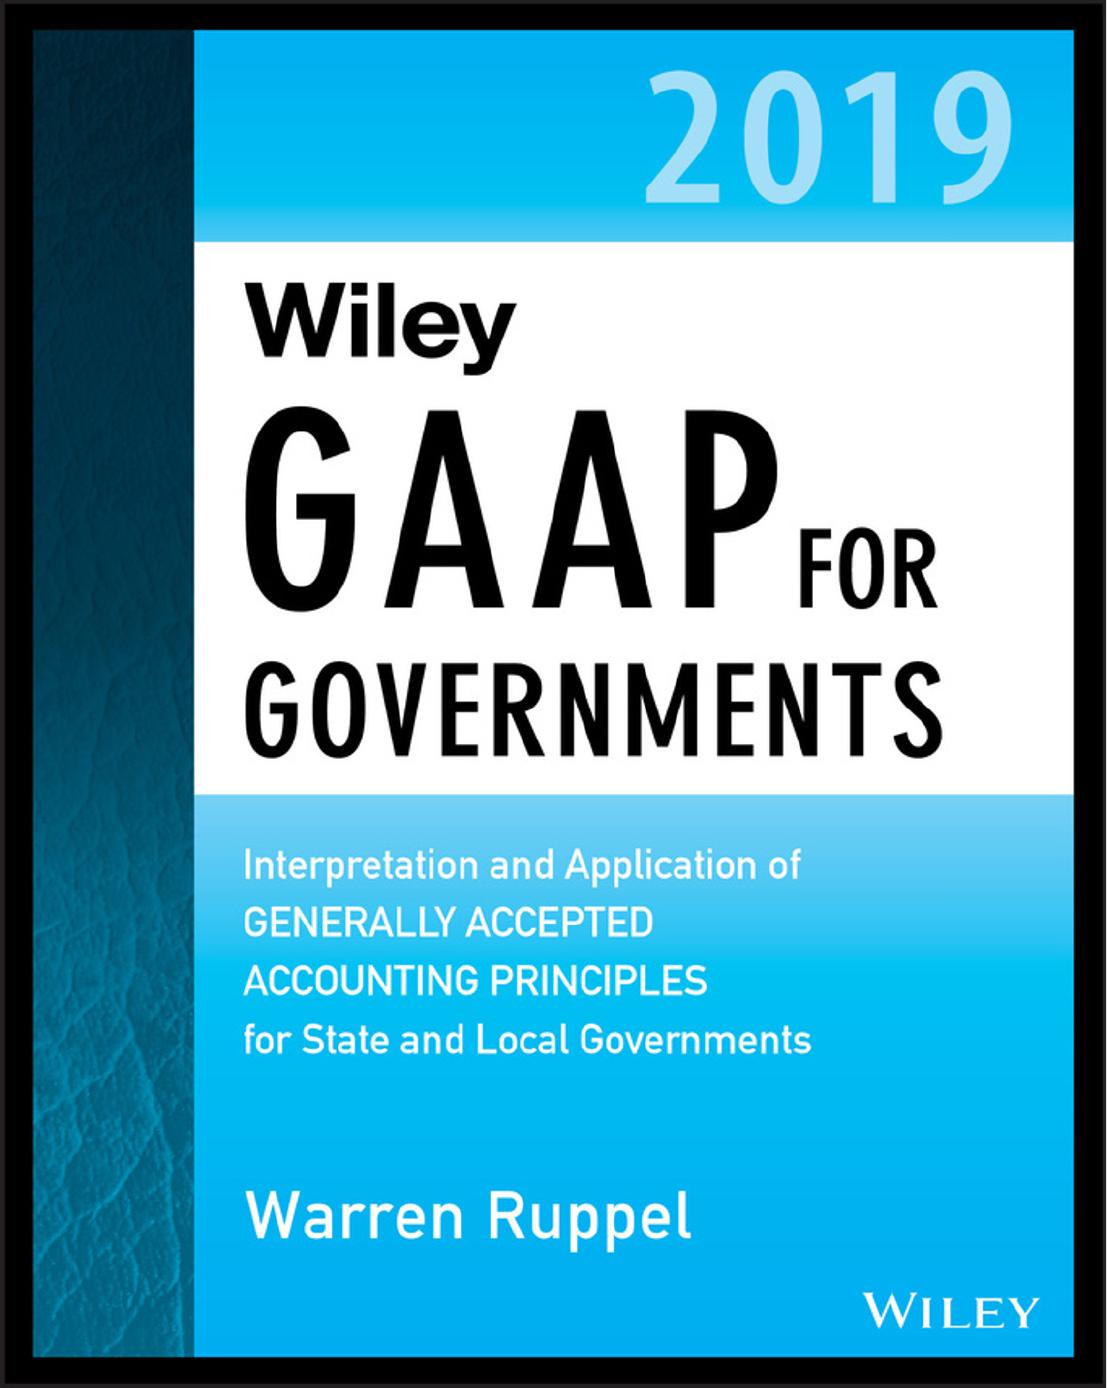 WILEYGAAP forGovernments2019